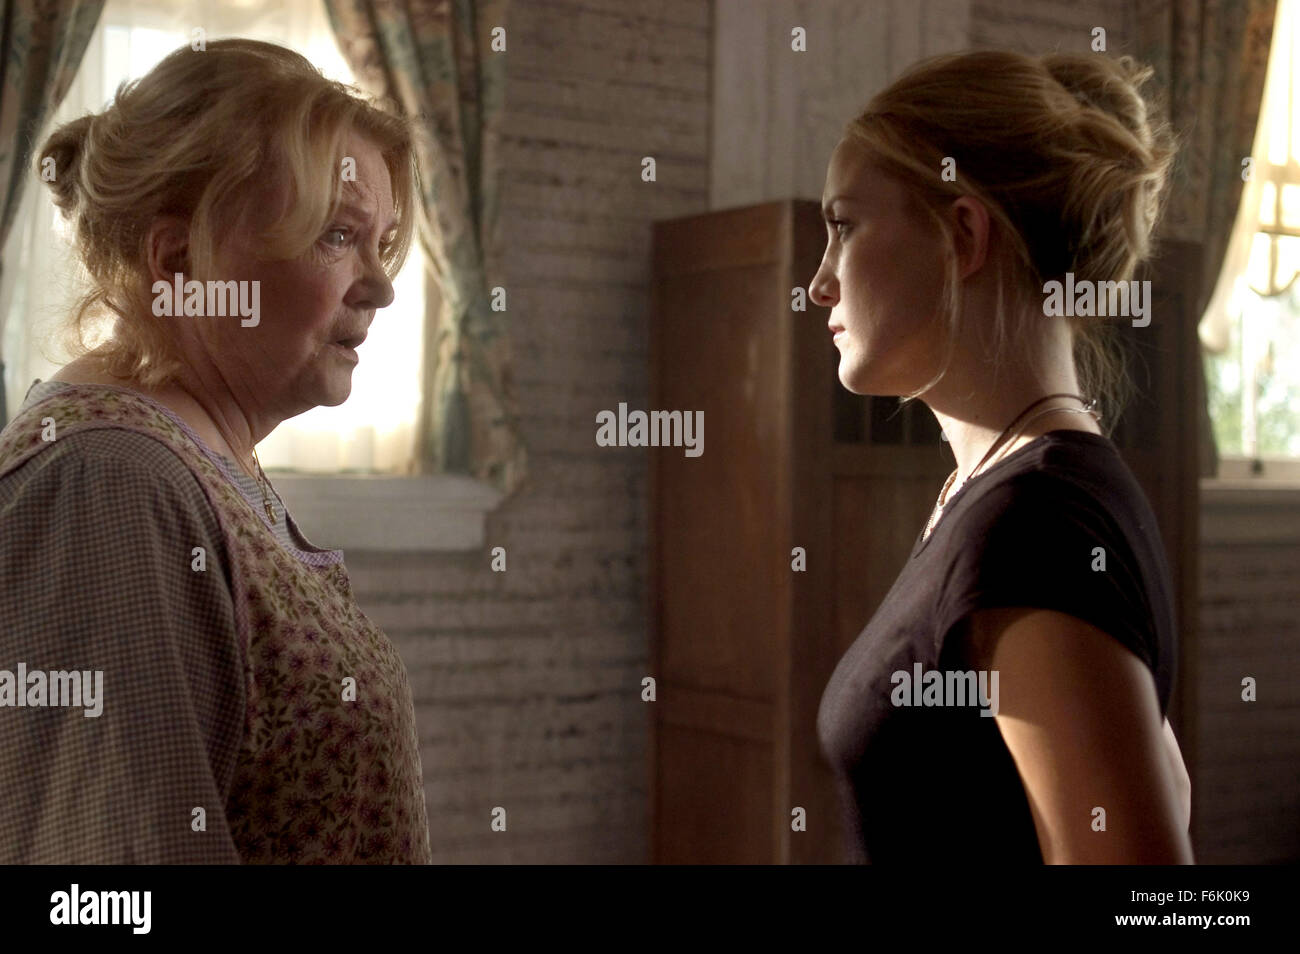 RELEASE DATE: August 12, 2005. MOVIE TITLE: The Skeleton Key. STUDIO: Universal Pictures. PLOT: A hospice nurse working at a spooky New Orleans plantation home finds herself entangled in a mystery involving the house's dark past. PICTURED: KATE HUDSON stars as Caroline Ellis and GENA ROWLANDS as Violet Devereaux. Stock Photo